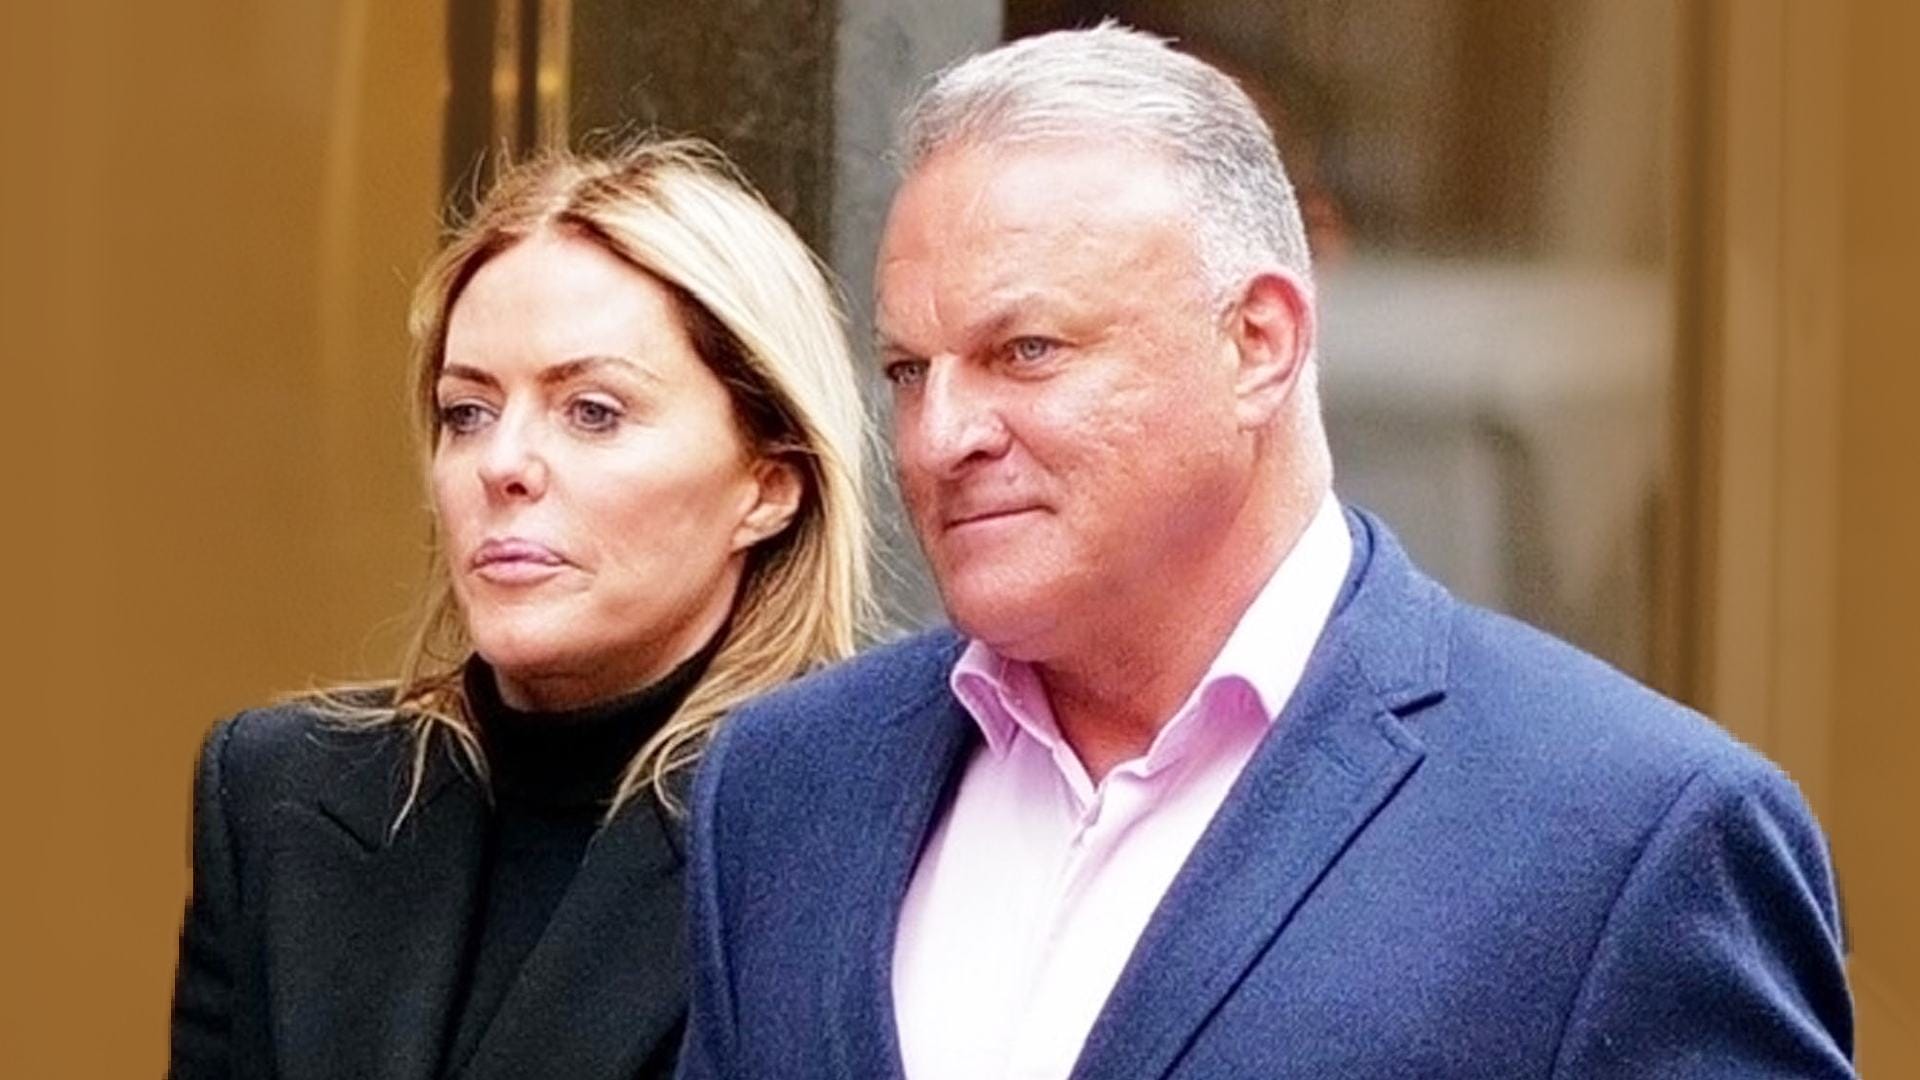 Patsy Kensit calls off fifth marriage to property tycoon after she was seen 'visibly distressed' at charity event